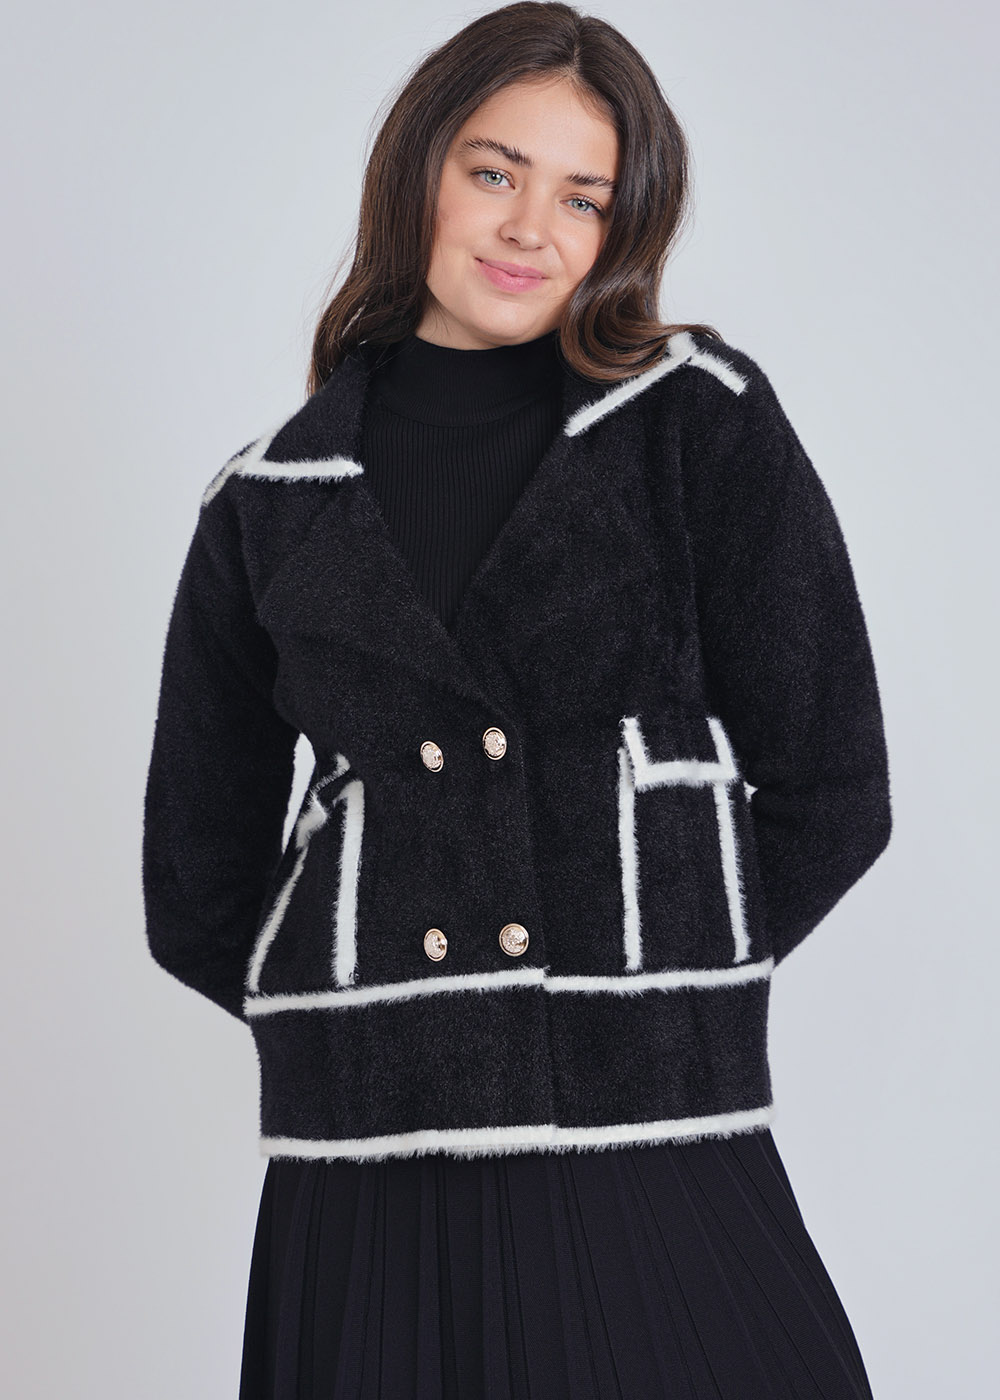 Black & White Cardigan Fusion: Warm Furry Knit with Formal Lapel